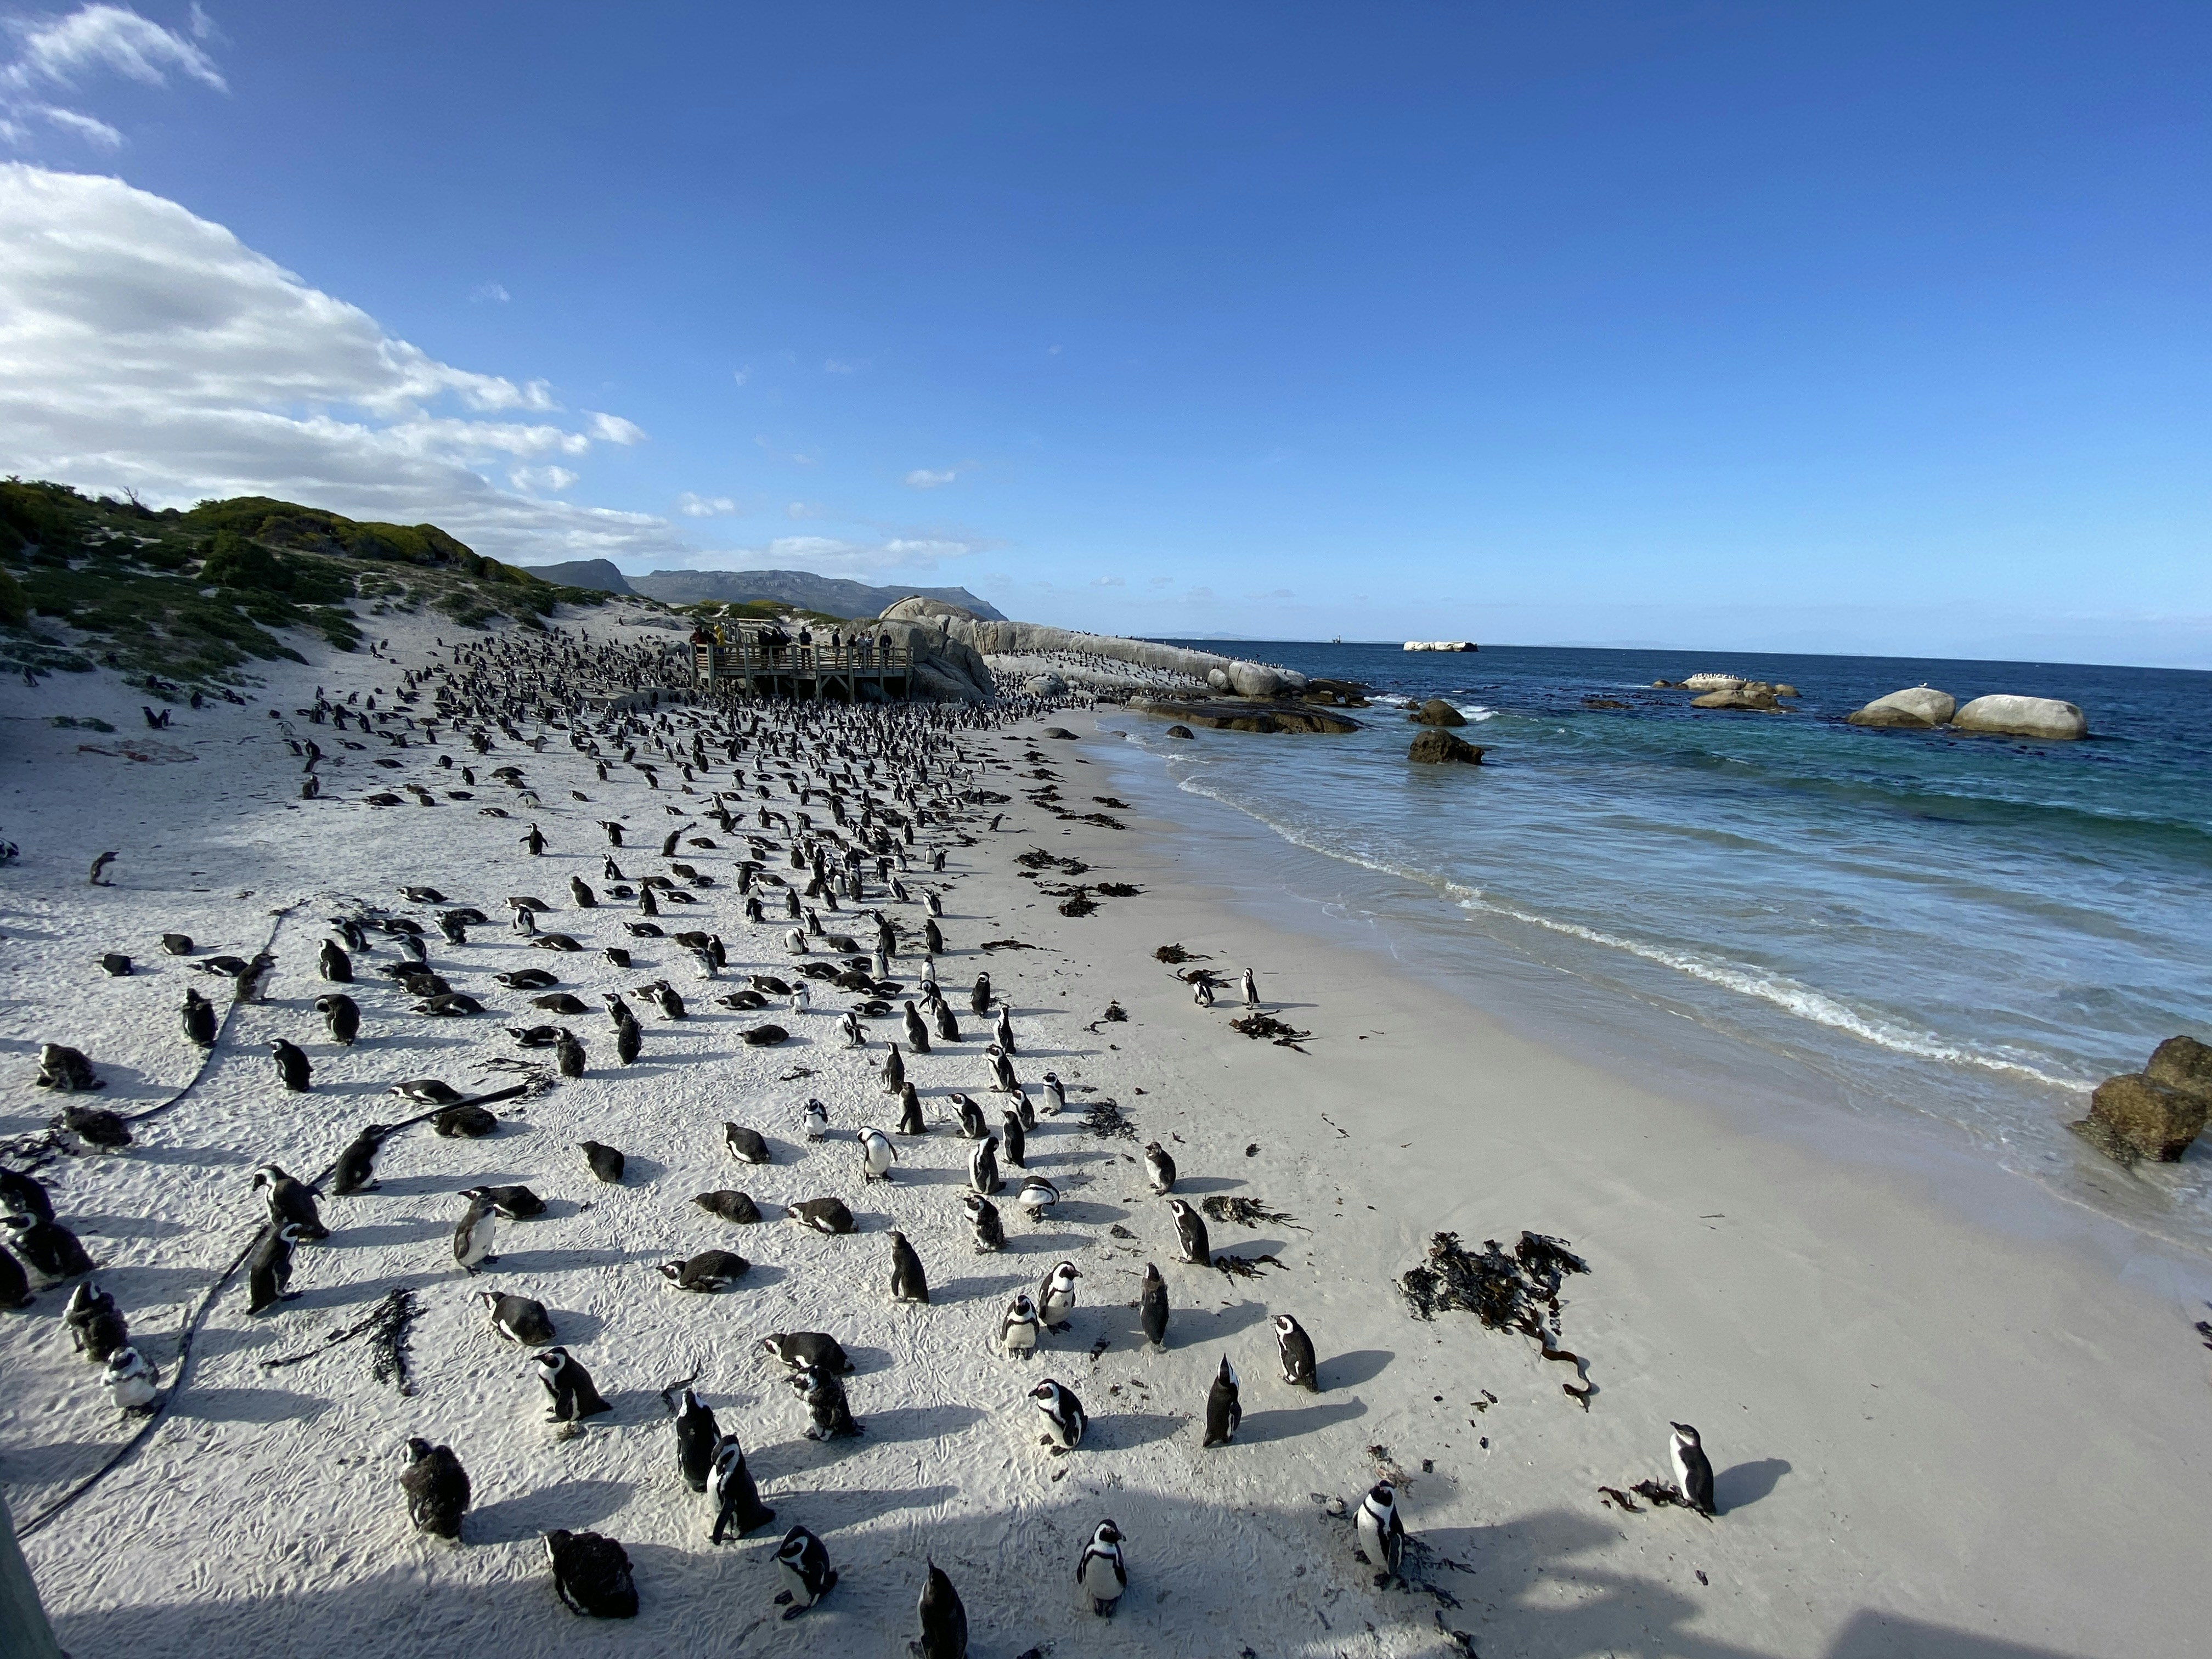 The Boulders Beach Penguins Colony at Simon’s Town, South Africa, at the evening. All are chilled